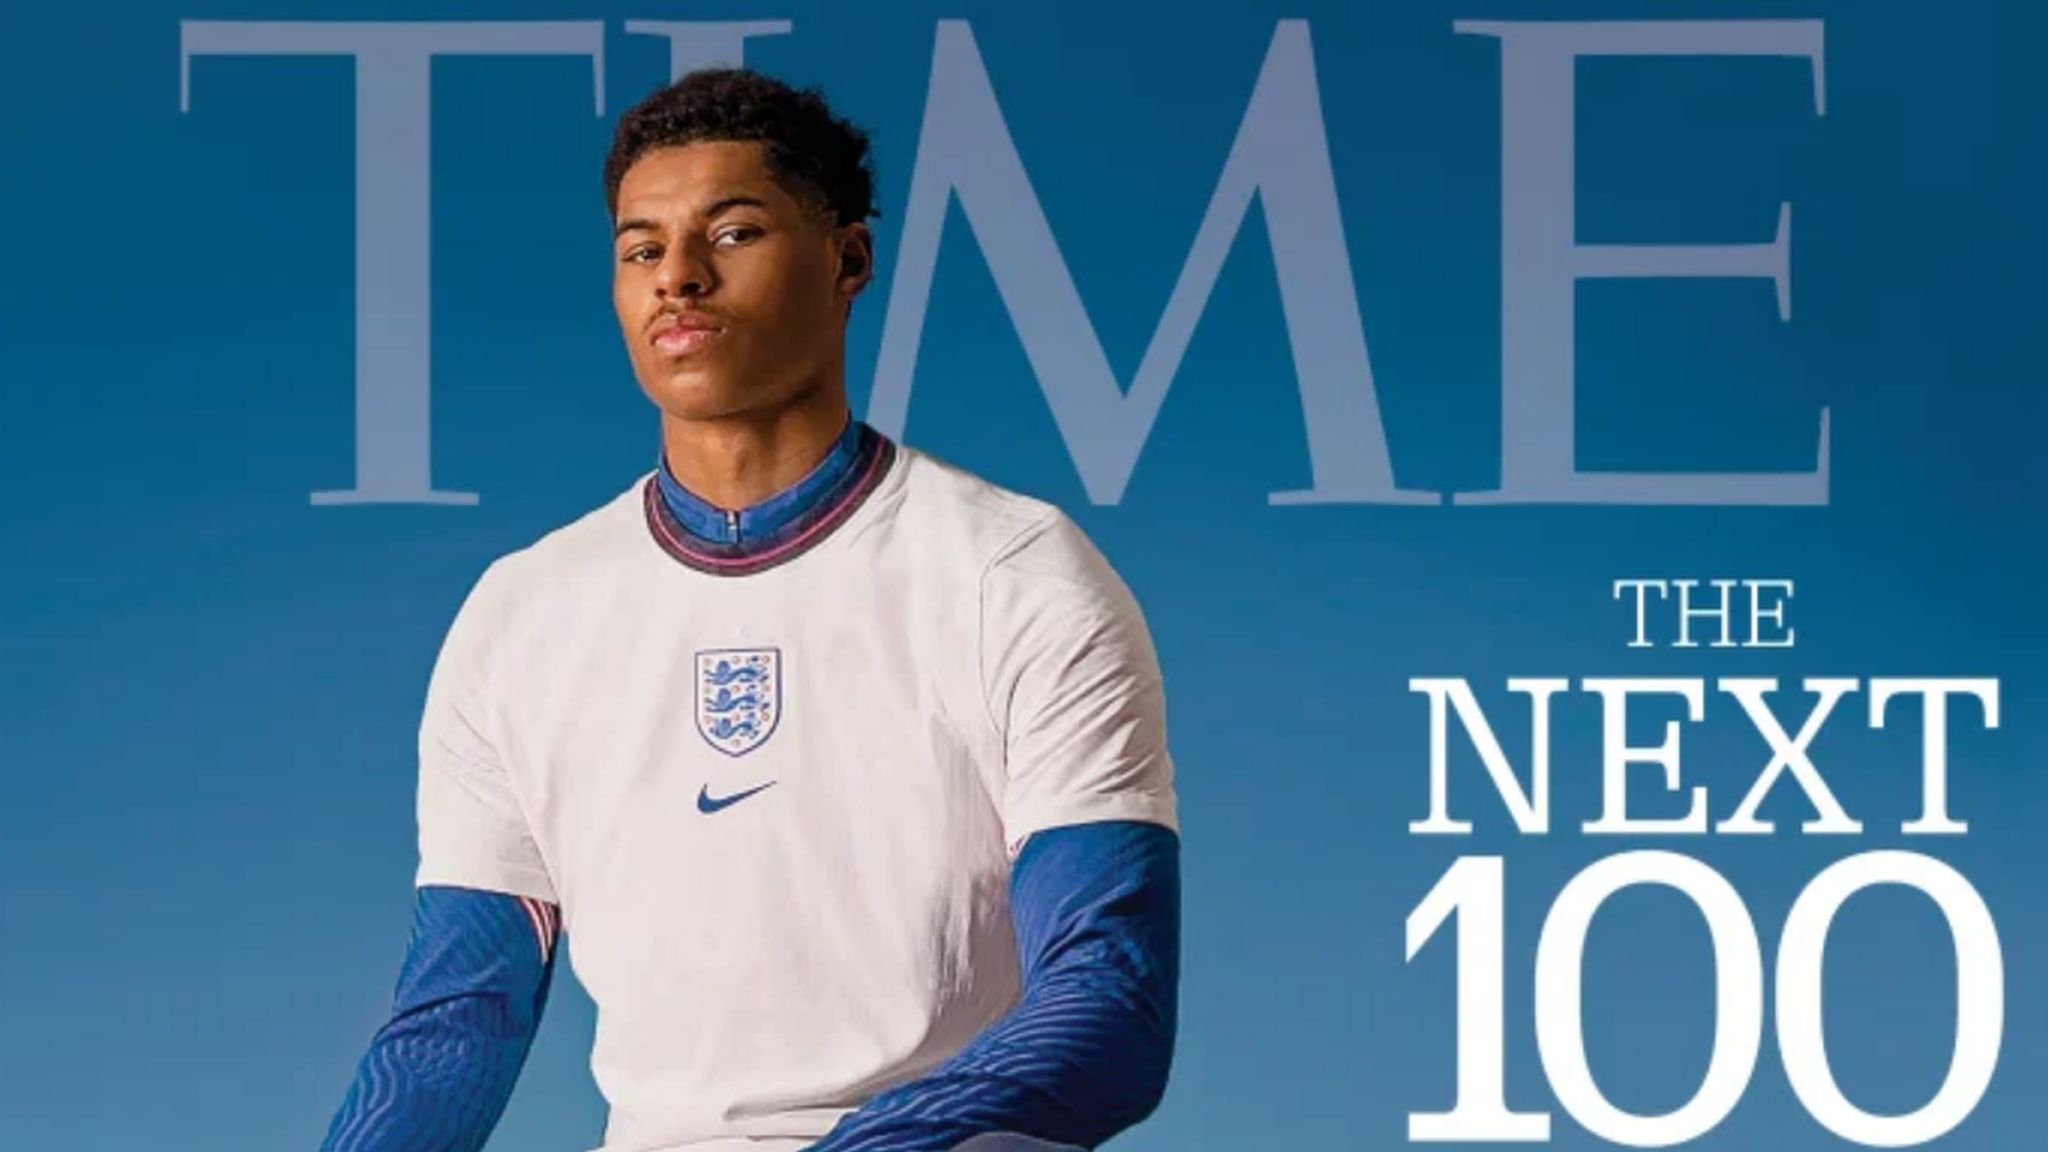 Marcus Rashford on the cover of TIME